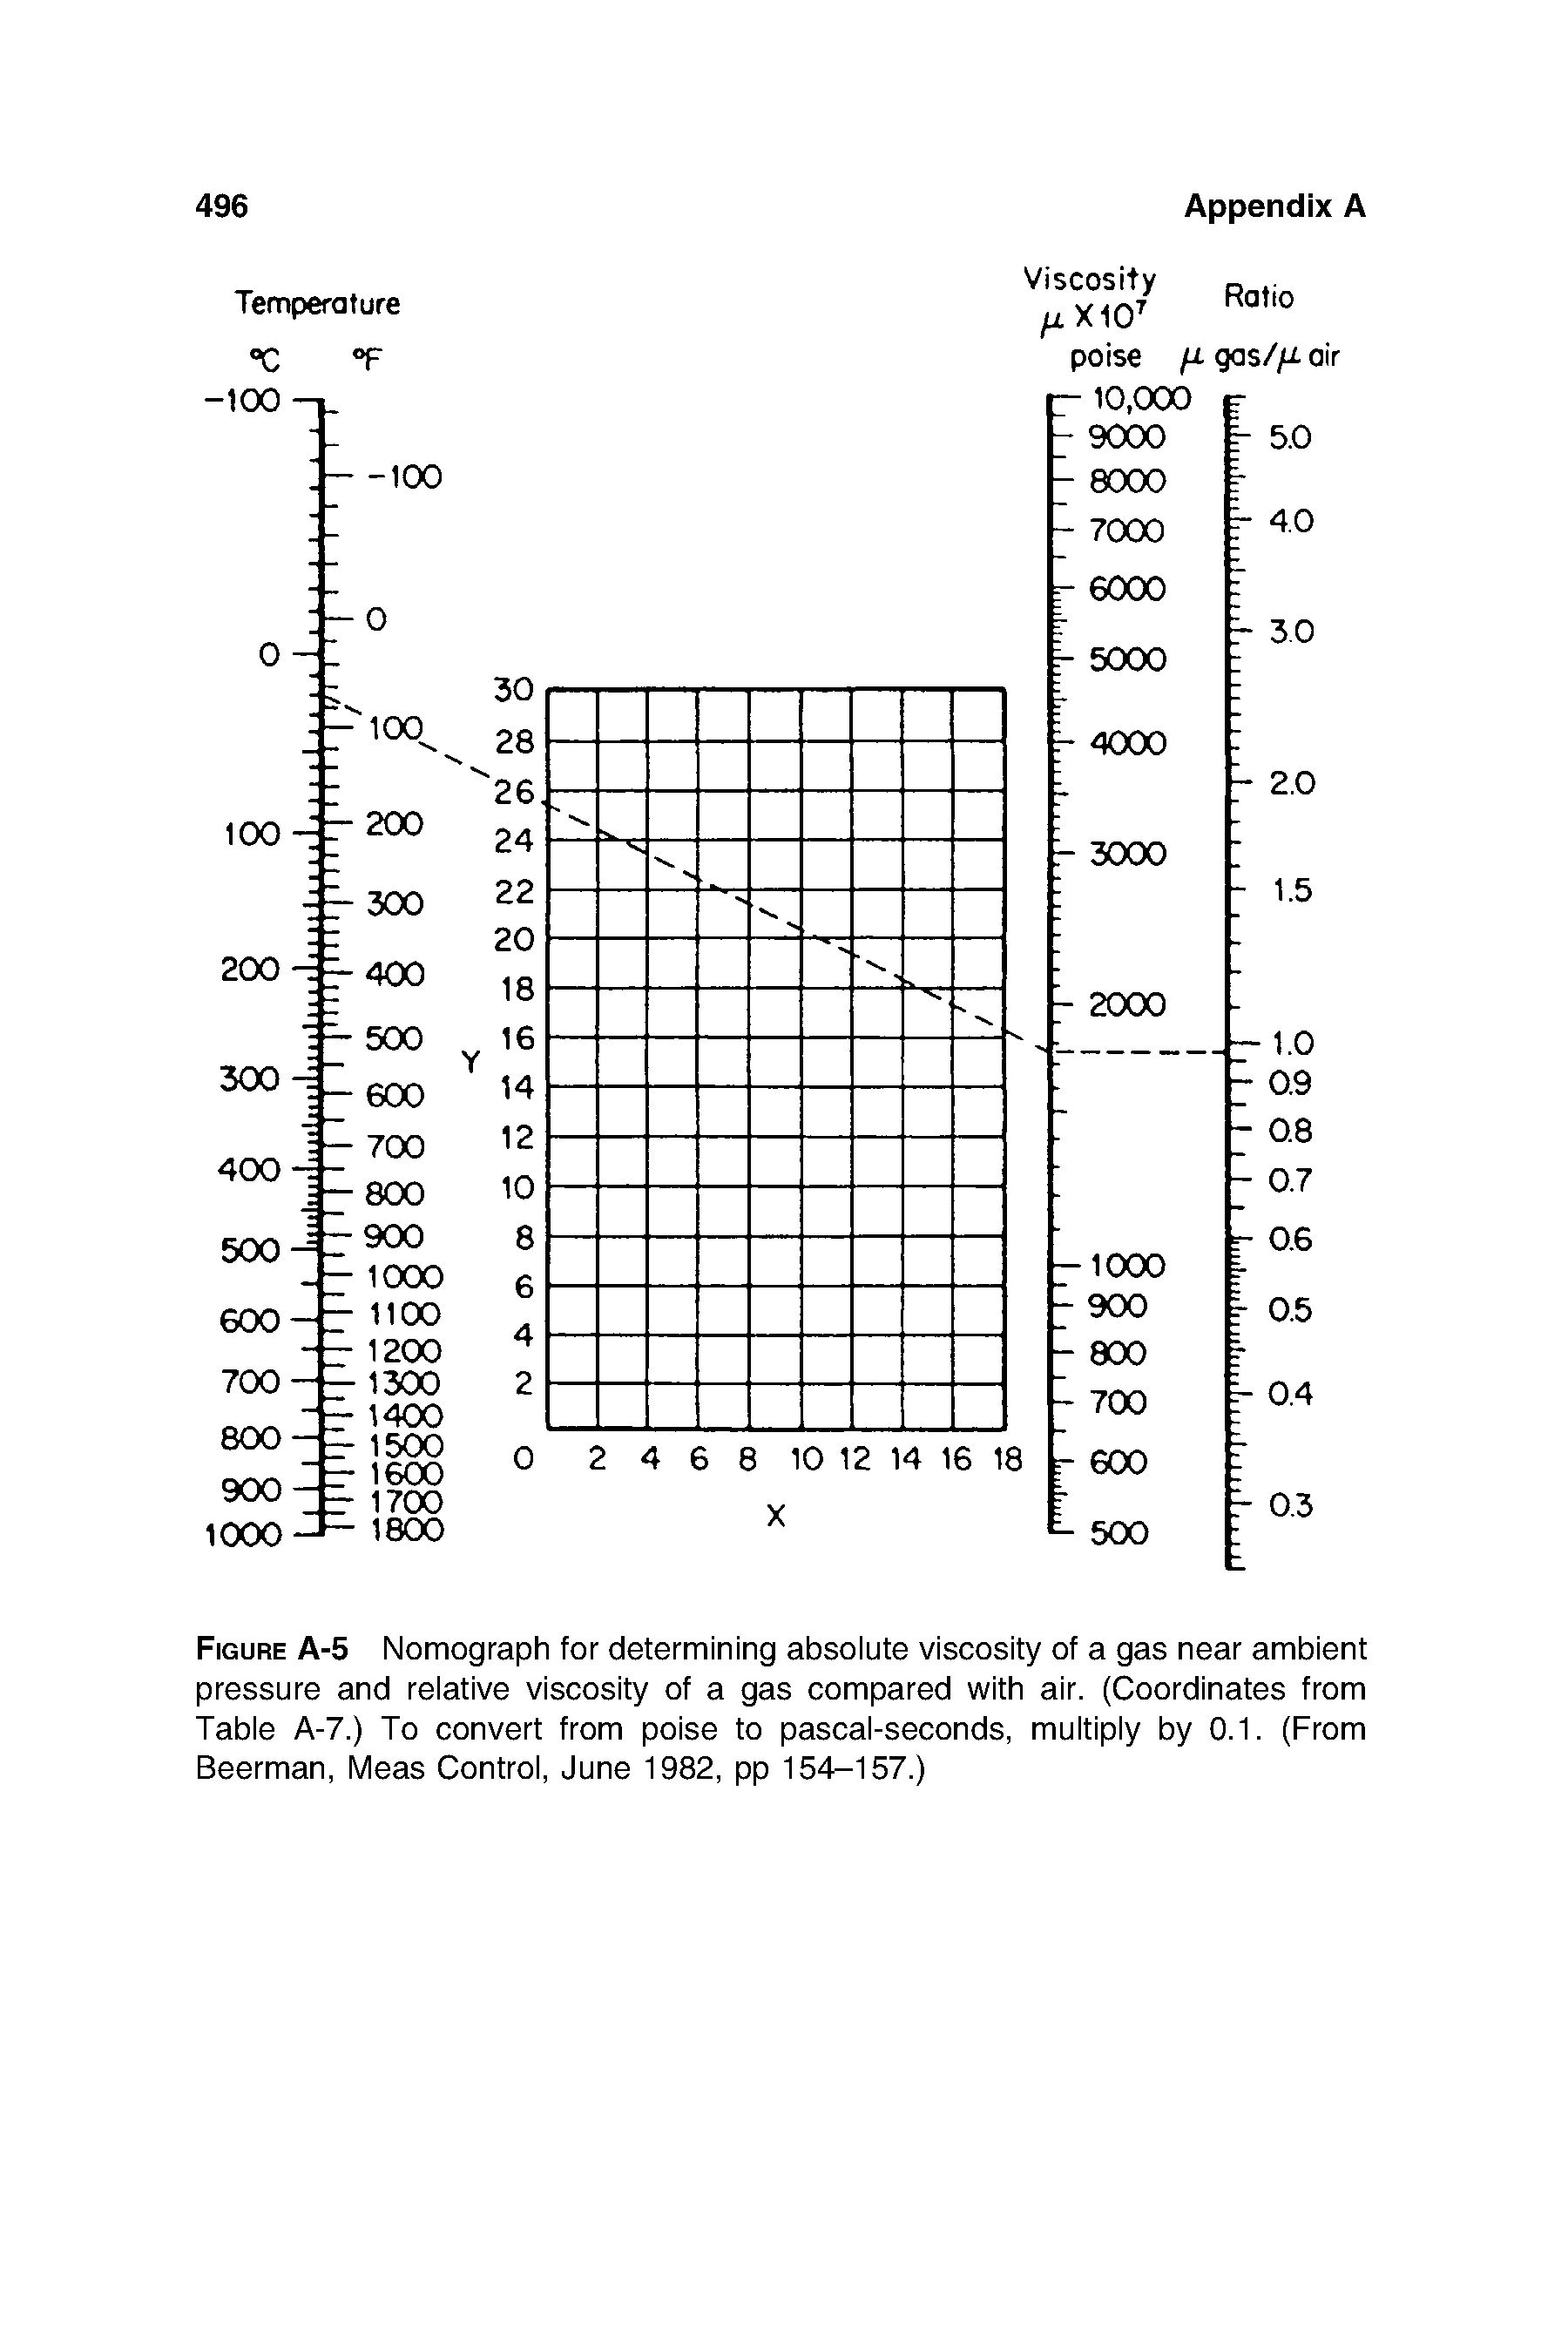 Figure A-5 Nomograph for determining absolute viscosity of a gas near ambient pressure and relative viscosity of a gas compared with air. (Coordinates from Table A-7.) To convert from poise to pascal-seconds, multiply by 0.1. (From Beerman, Meas Control, June 1982, pp 154-157.)...